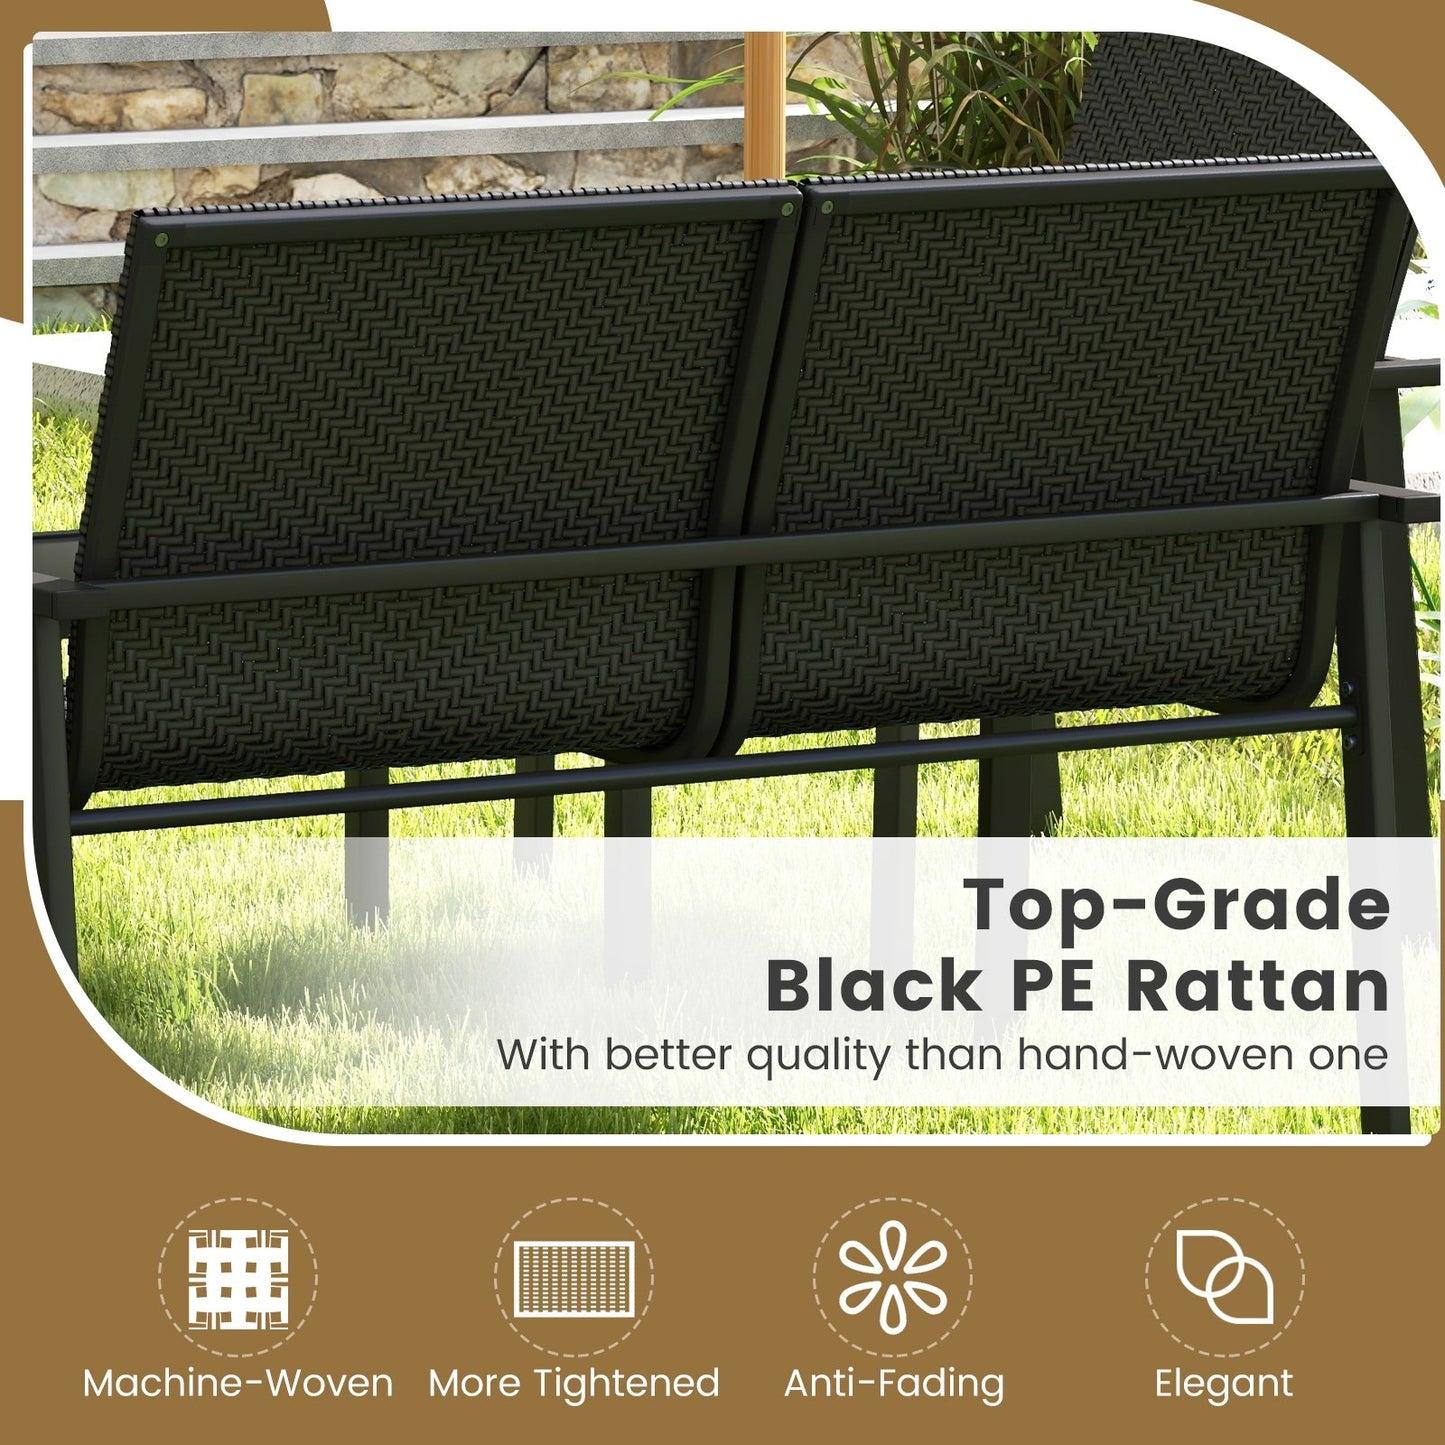 4 Pieces Patio Furniture Set with Heavy Duty Galvanized Metal Frame, Black